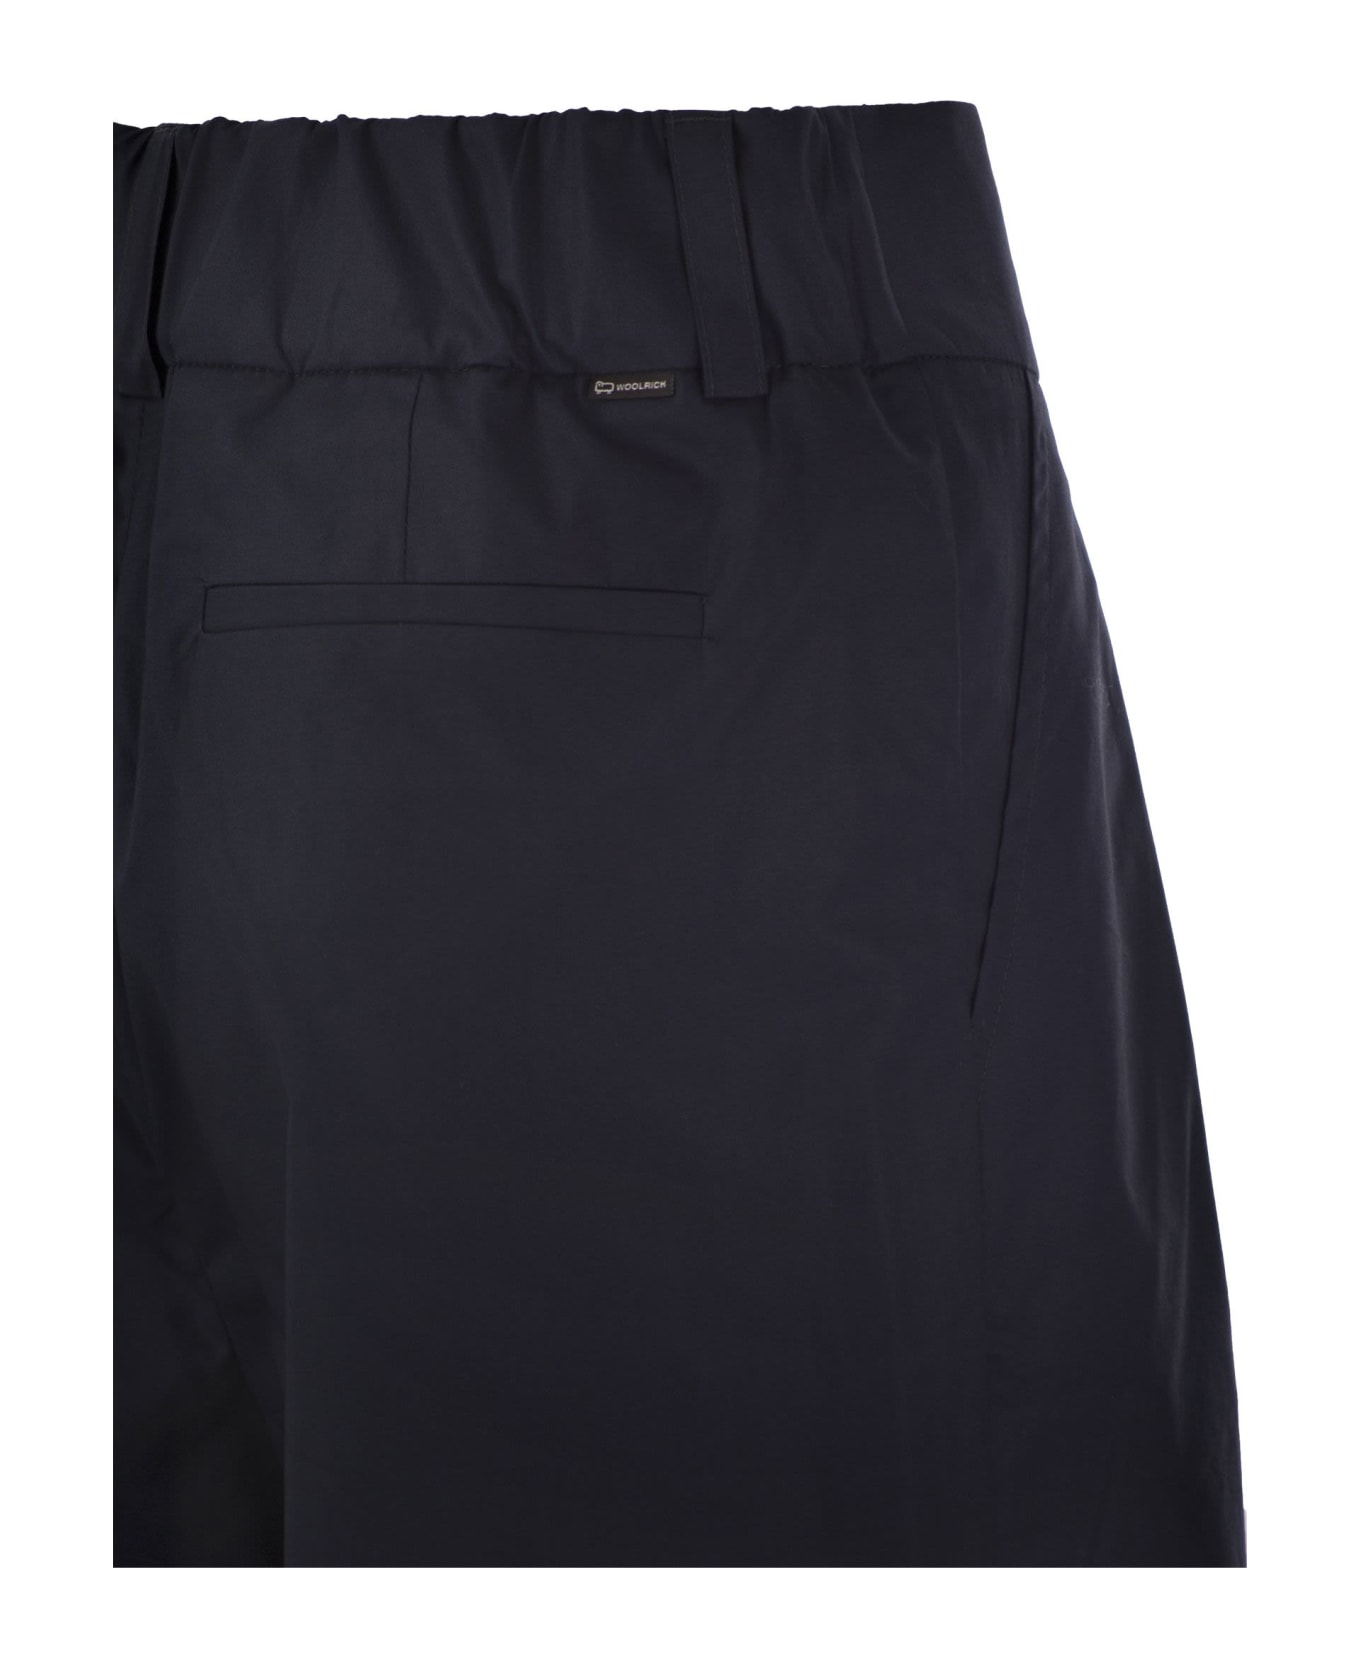 Woolrich Cotton Pleated Trousers - Blue ボトムス